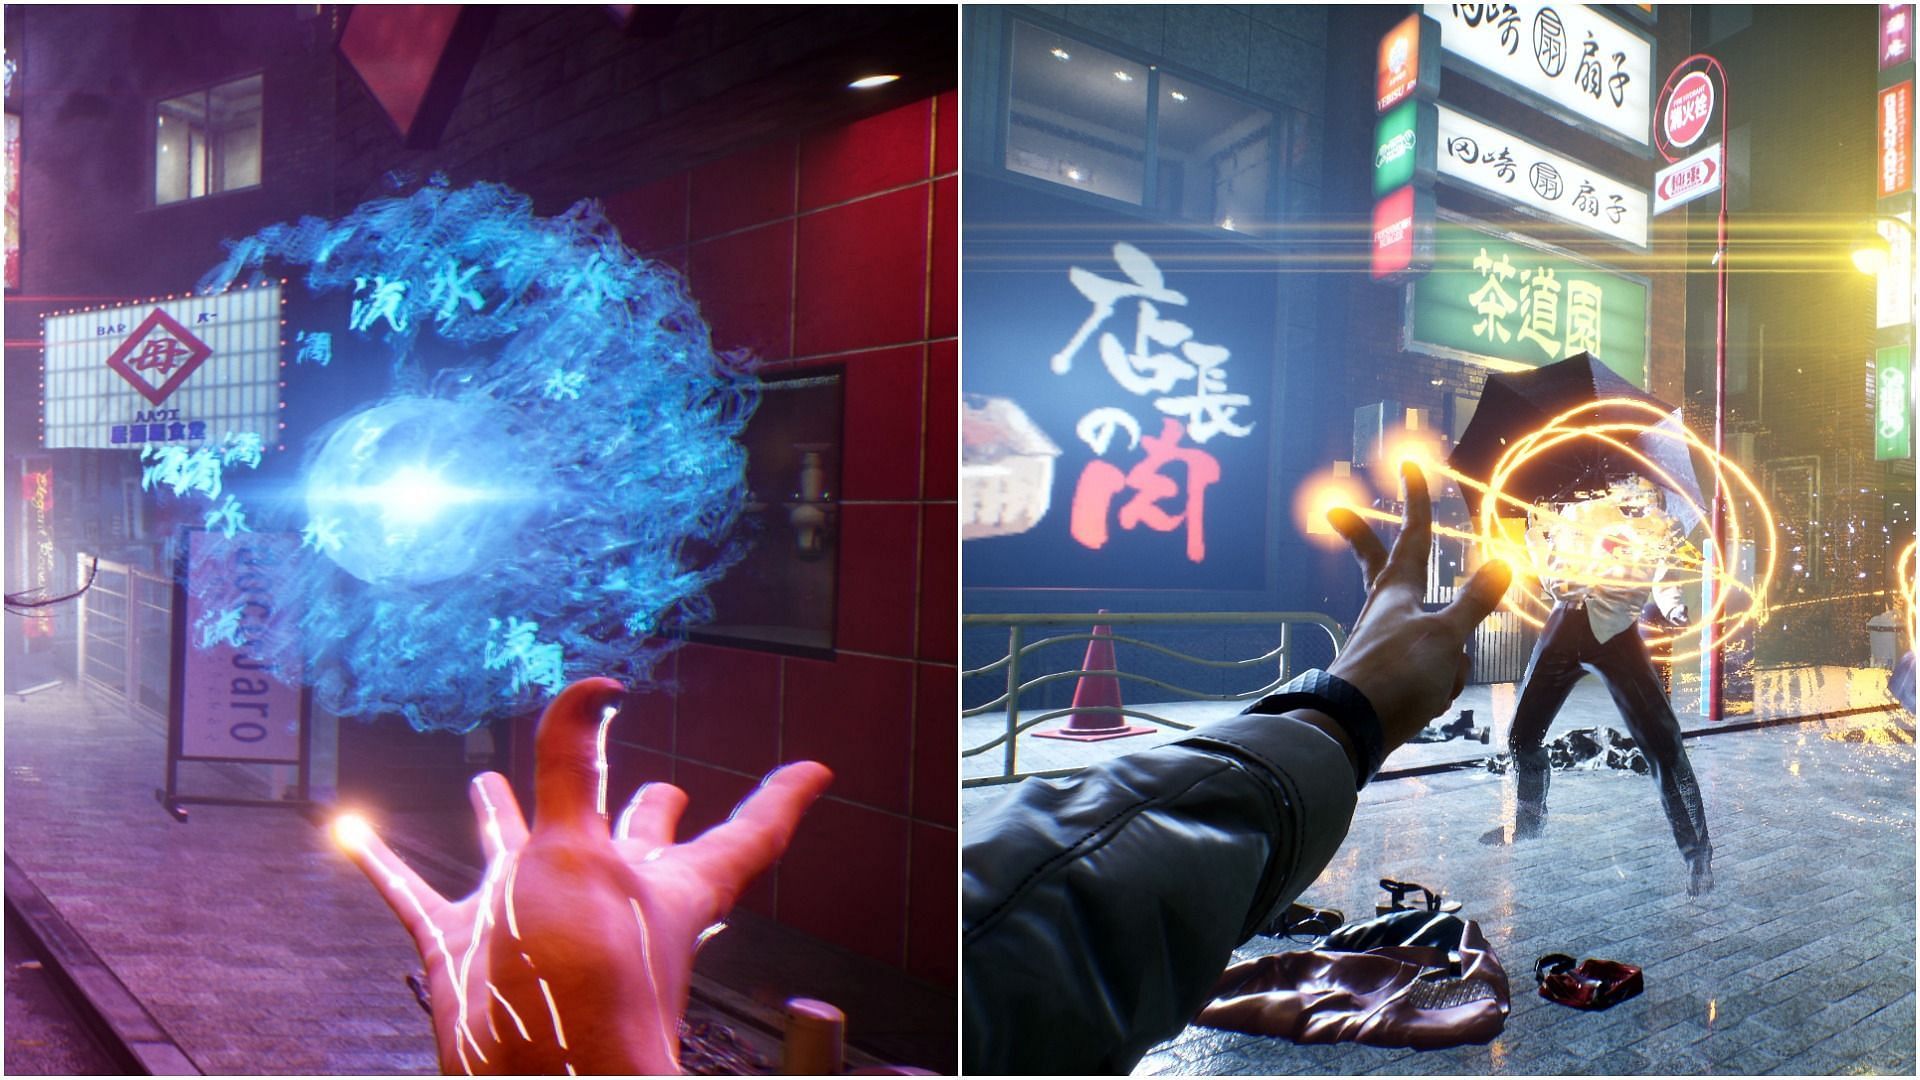 How Tango Gameworks Ghostwire Tokyo Takes A Magic Action Focus Rather